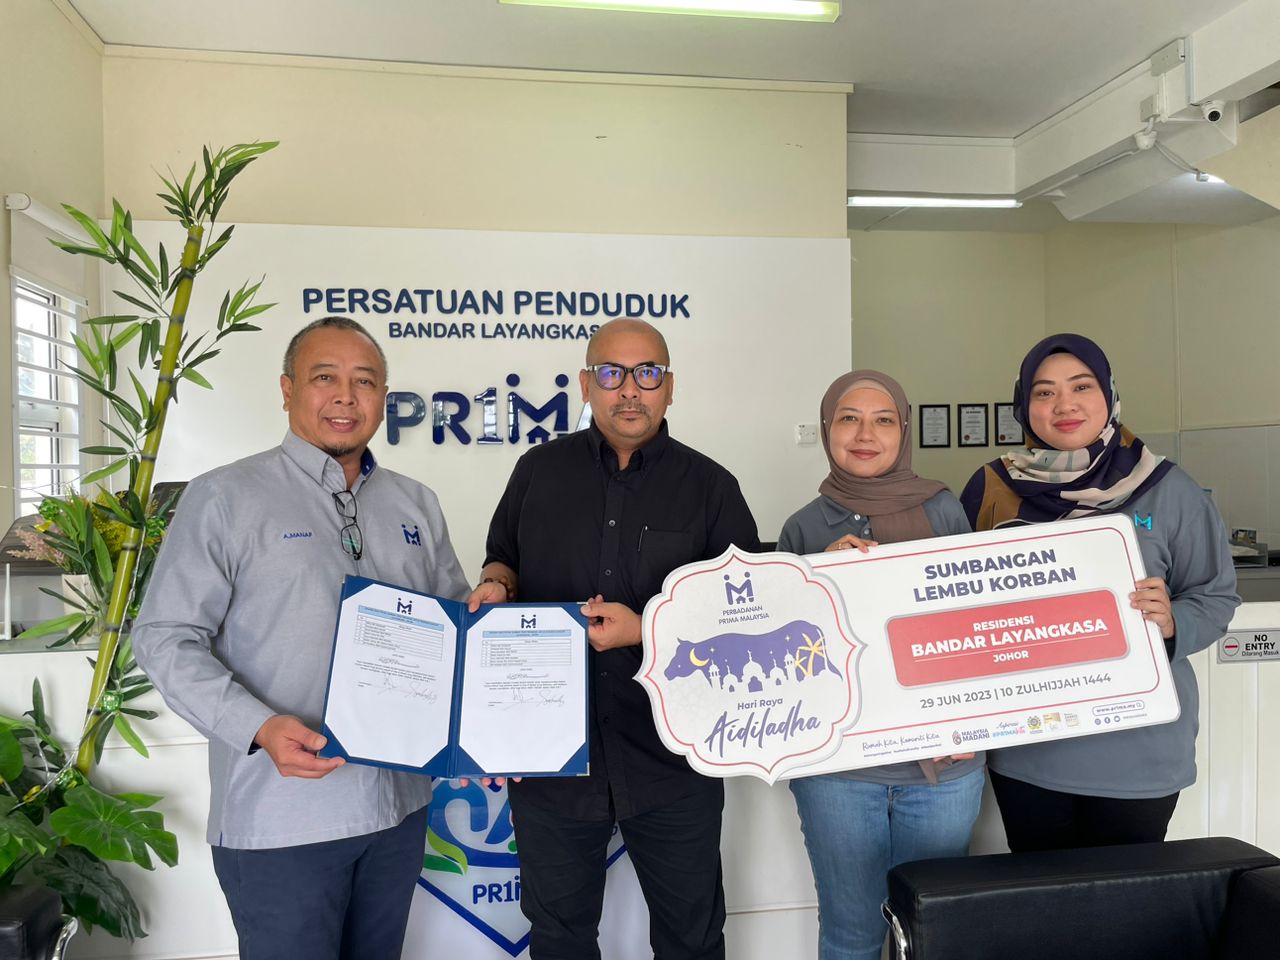 Cover image of Community Past Program: PR1MA Raya Qurban – Contribution and sponsorships of cows which in line with the #PR1MAKita Aspiration at Residensi Bandar Layangkasa, Johor.